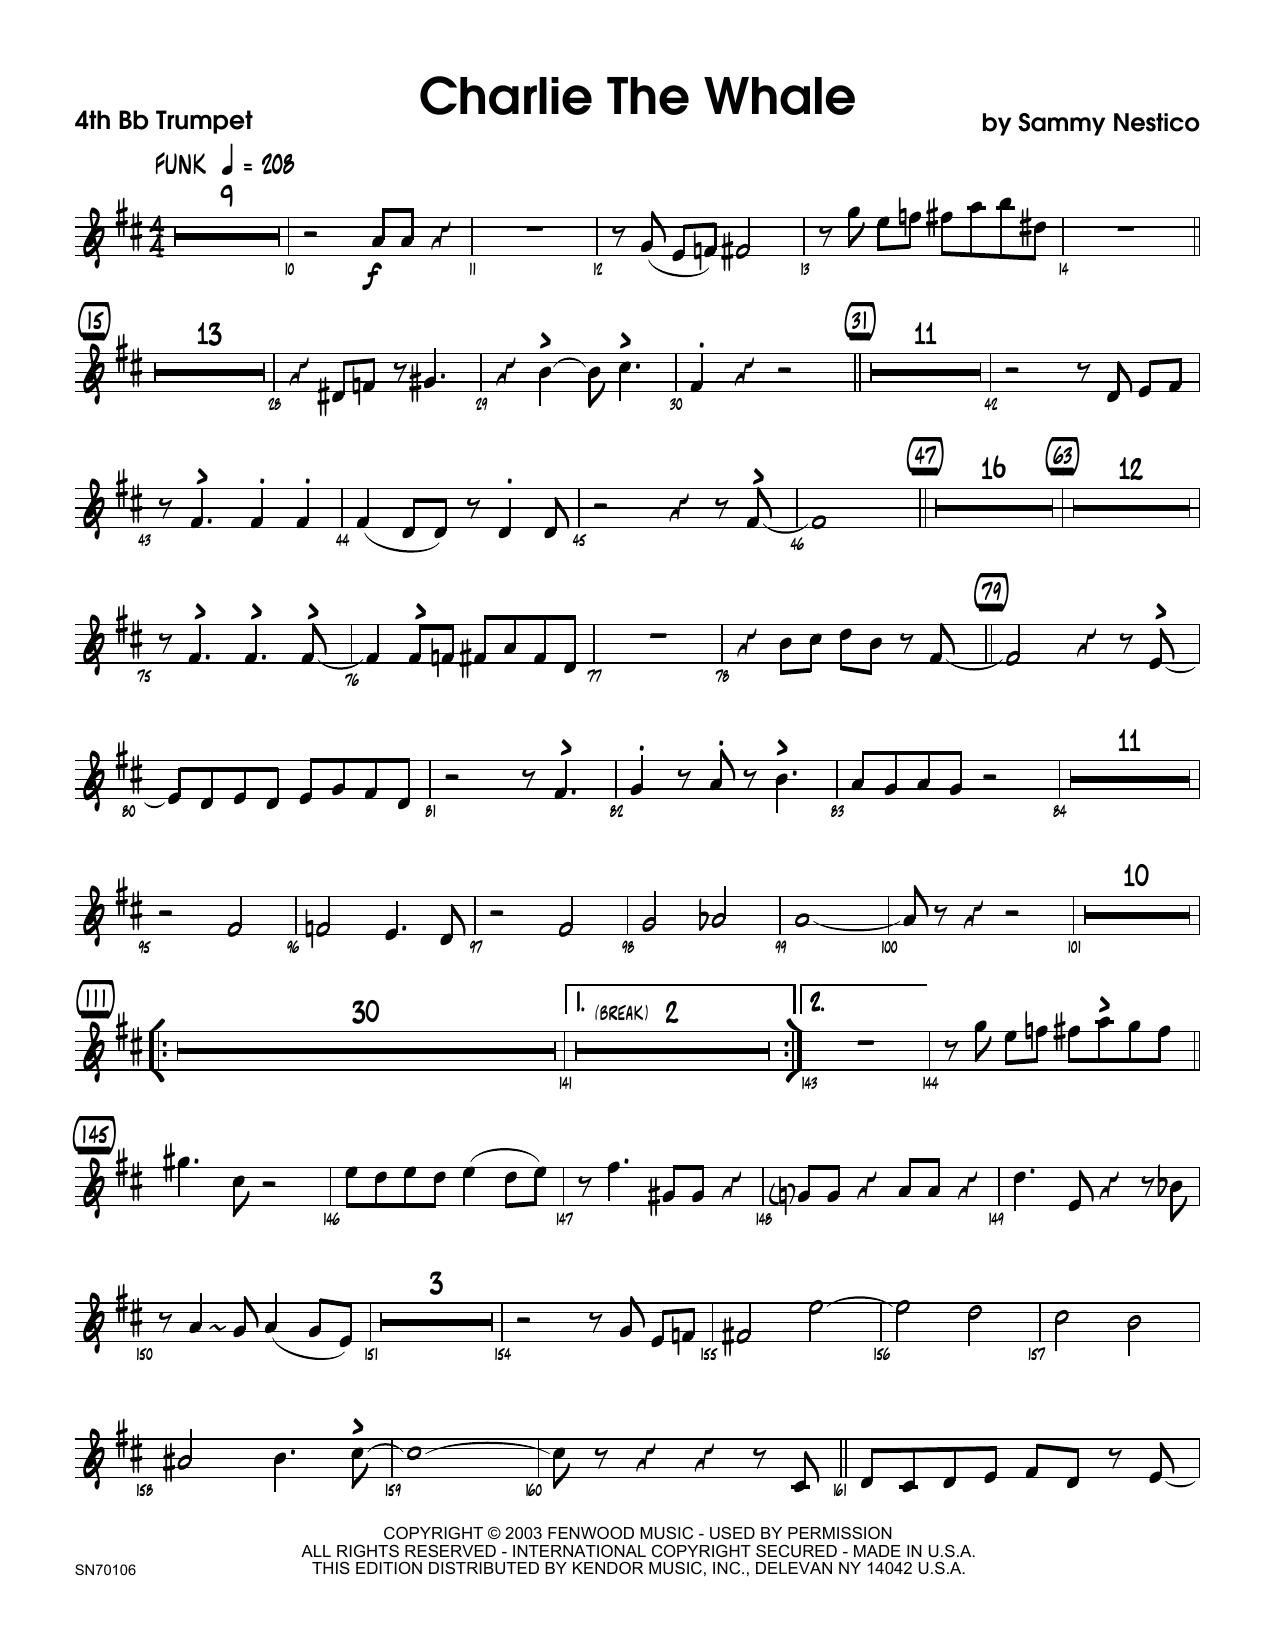 Download Sammy Nestico Charlie The Whale - 4th Bb Trumpet Sheet Music